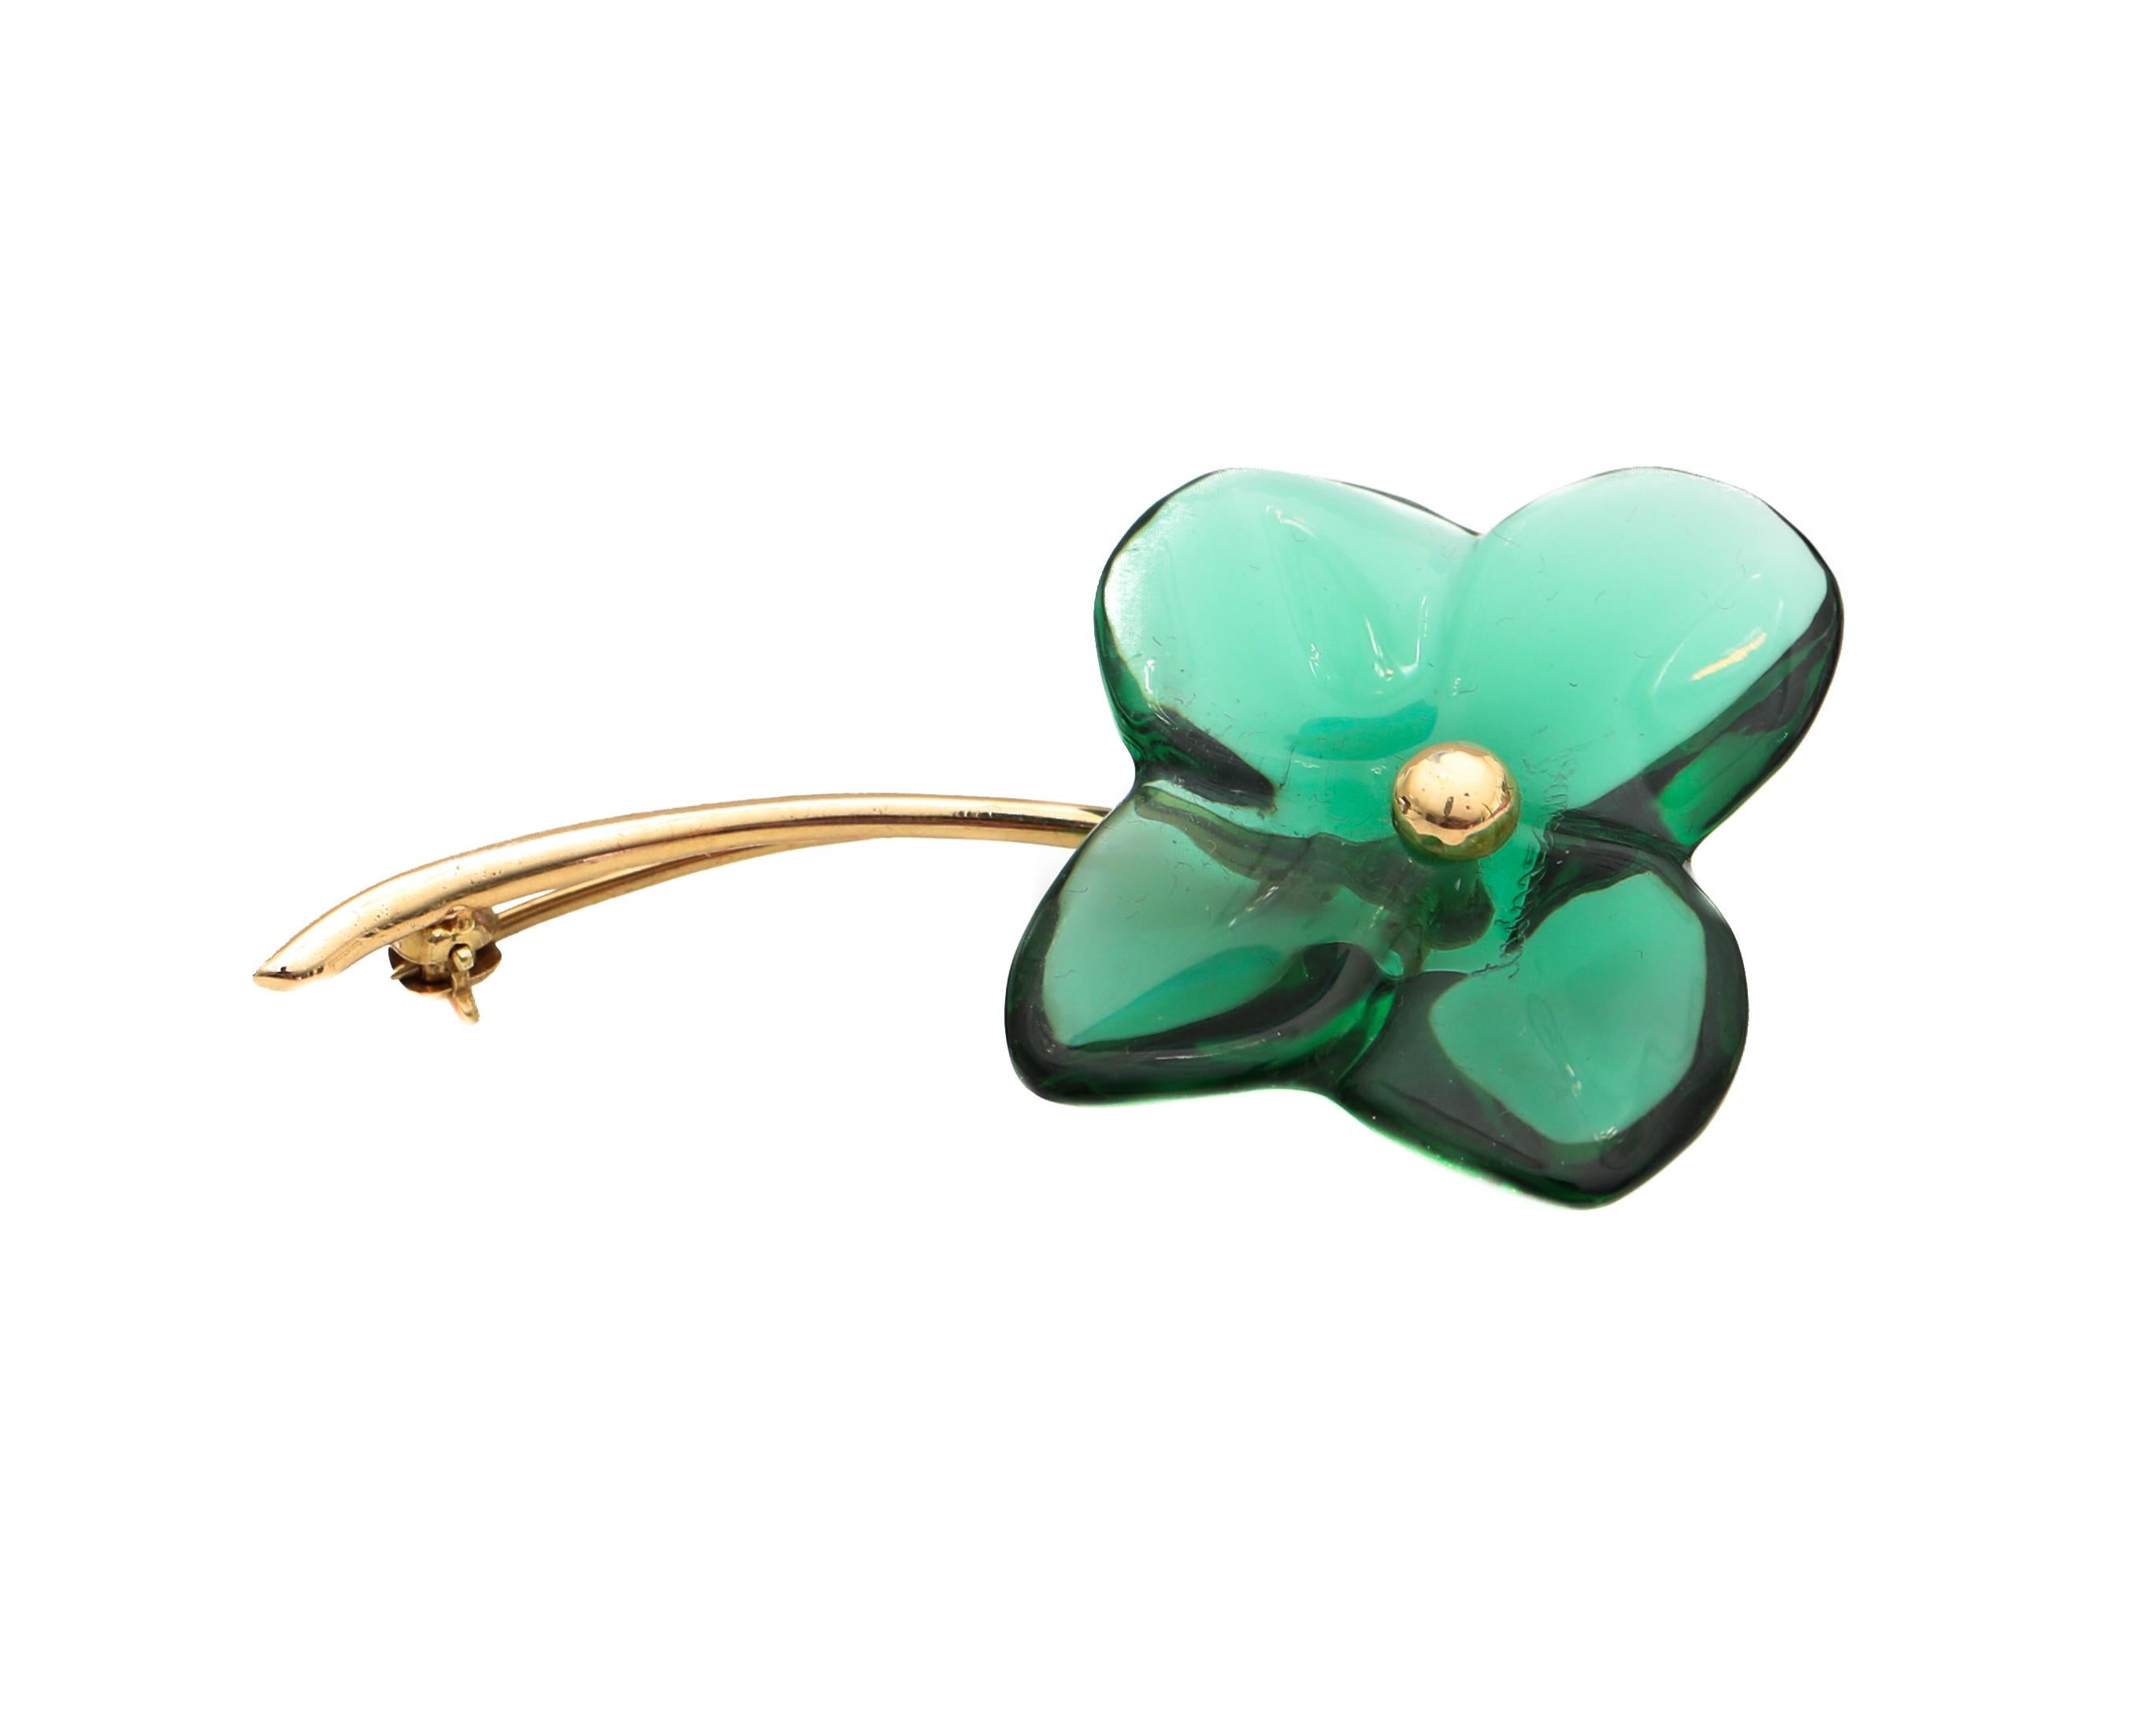 Beautifully crafted 1990s Designer Baccarat Lapel Pin
Features a 4 Leaf Clover Design on a stem made of 18 karat yellow gold

Lapel details:
Metal: 18 Karat Yellow Gold
Weight: 5.5 Grams
Designer: Baccarat 